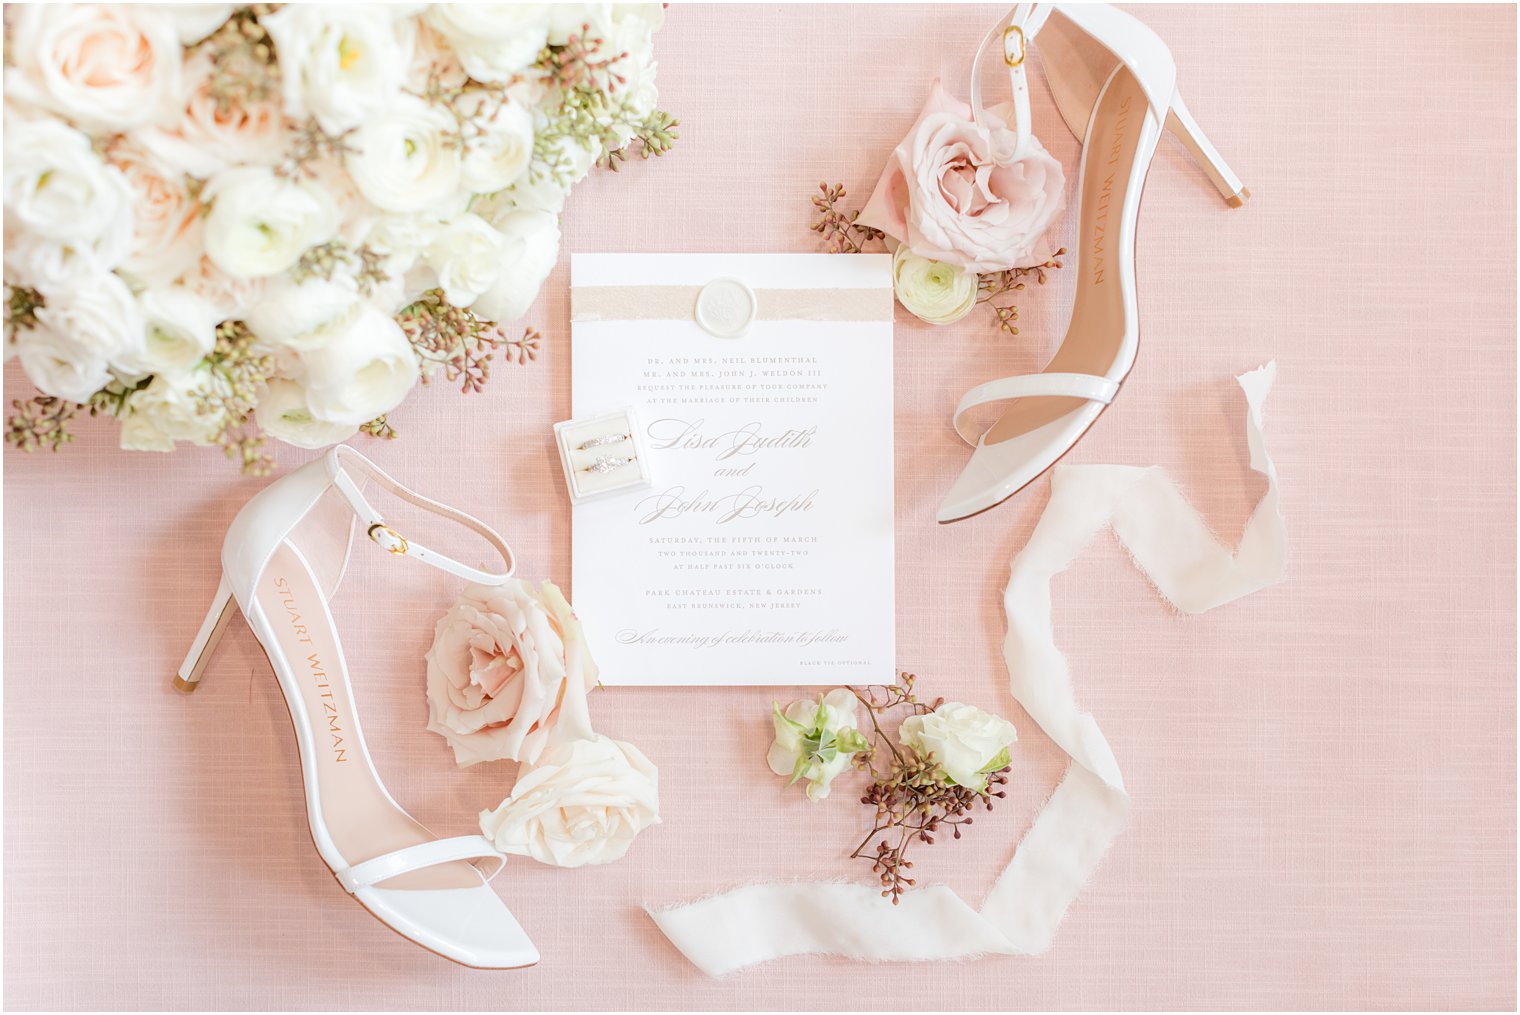 elegant invitation suite with white shoes for bride